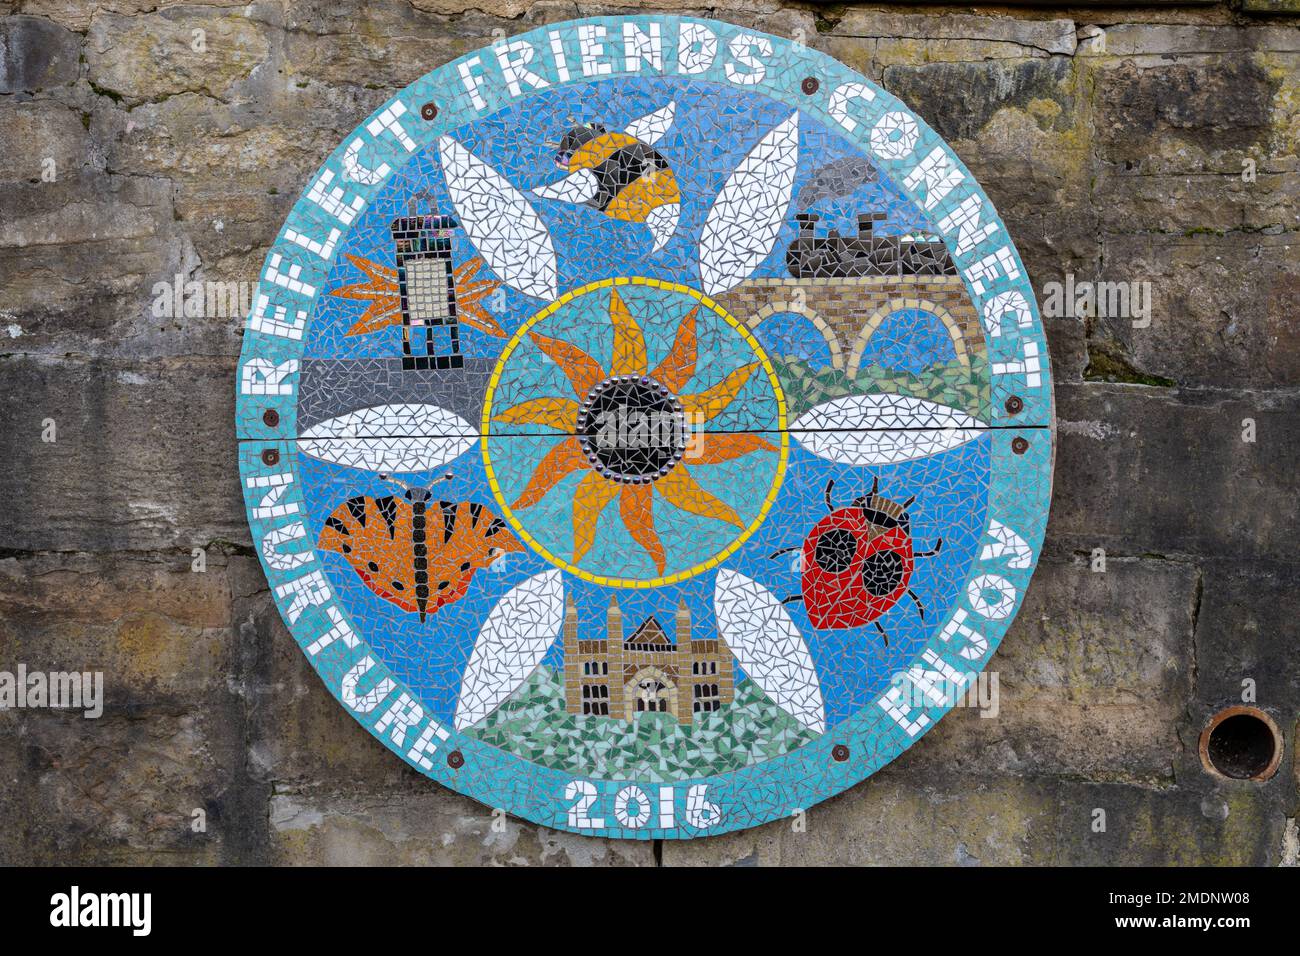 A mosaic plaque in a community garden commemorates its founding, in 2016. In Wharton Park in the city of Durham, County Durham UK Stock Photo